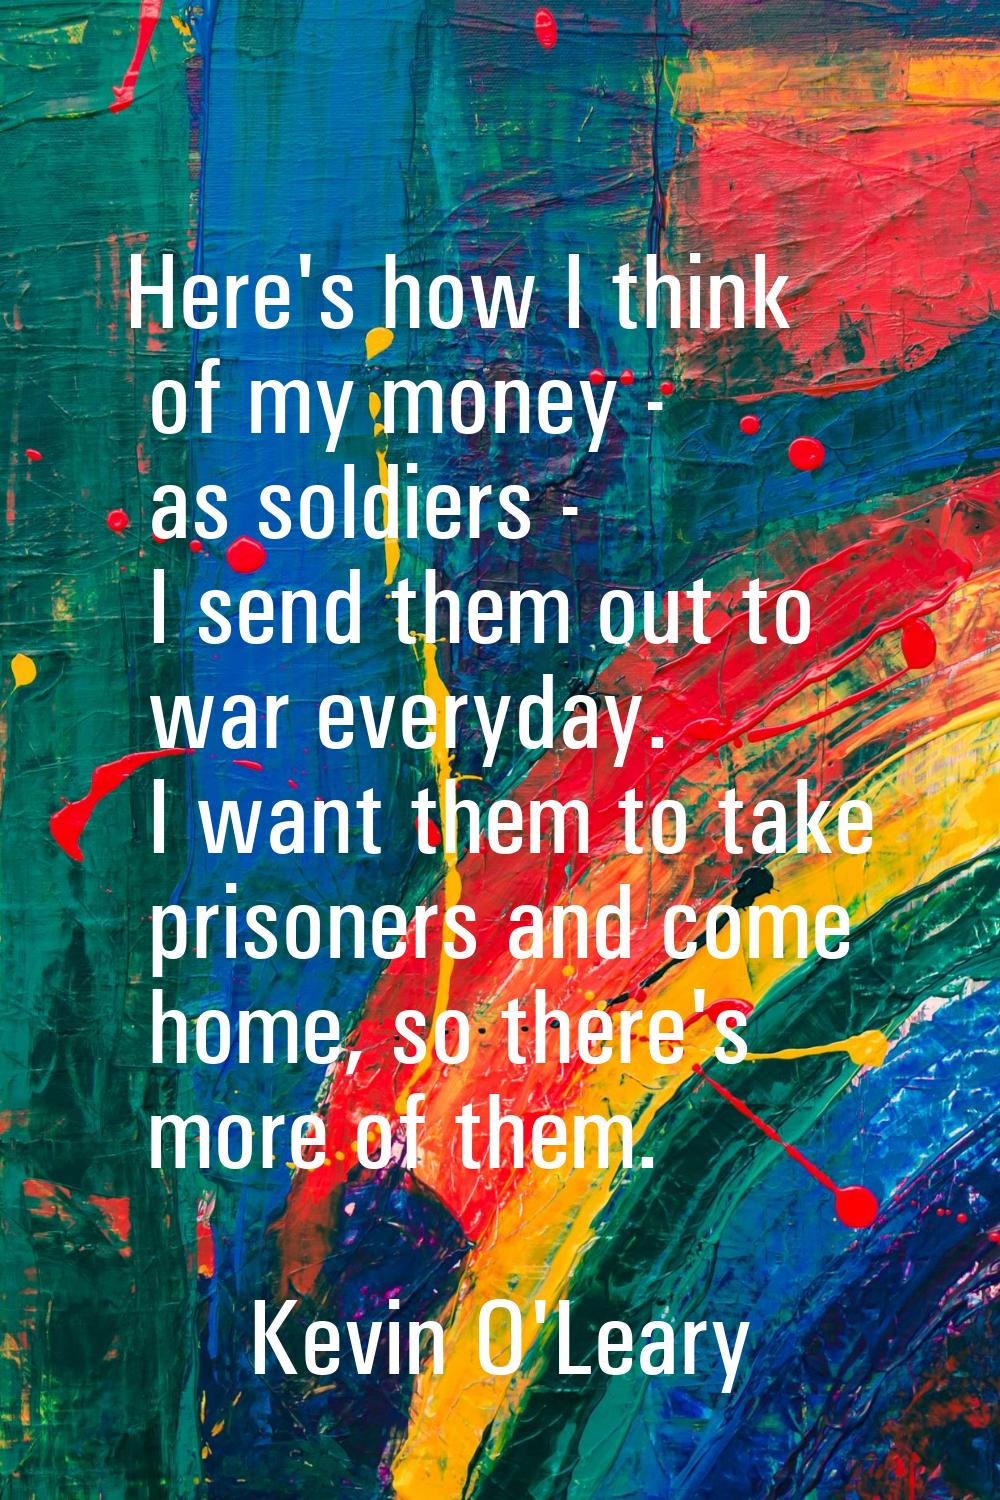 Here's how I think of my money - as soldiers - I send them out to war everyday. I want them to take